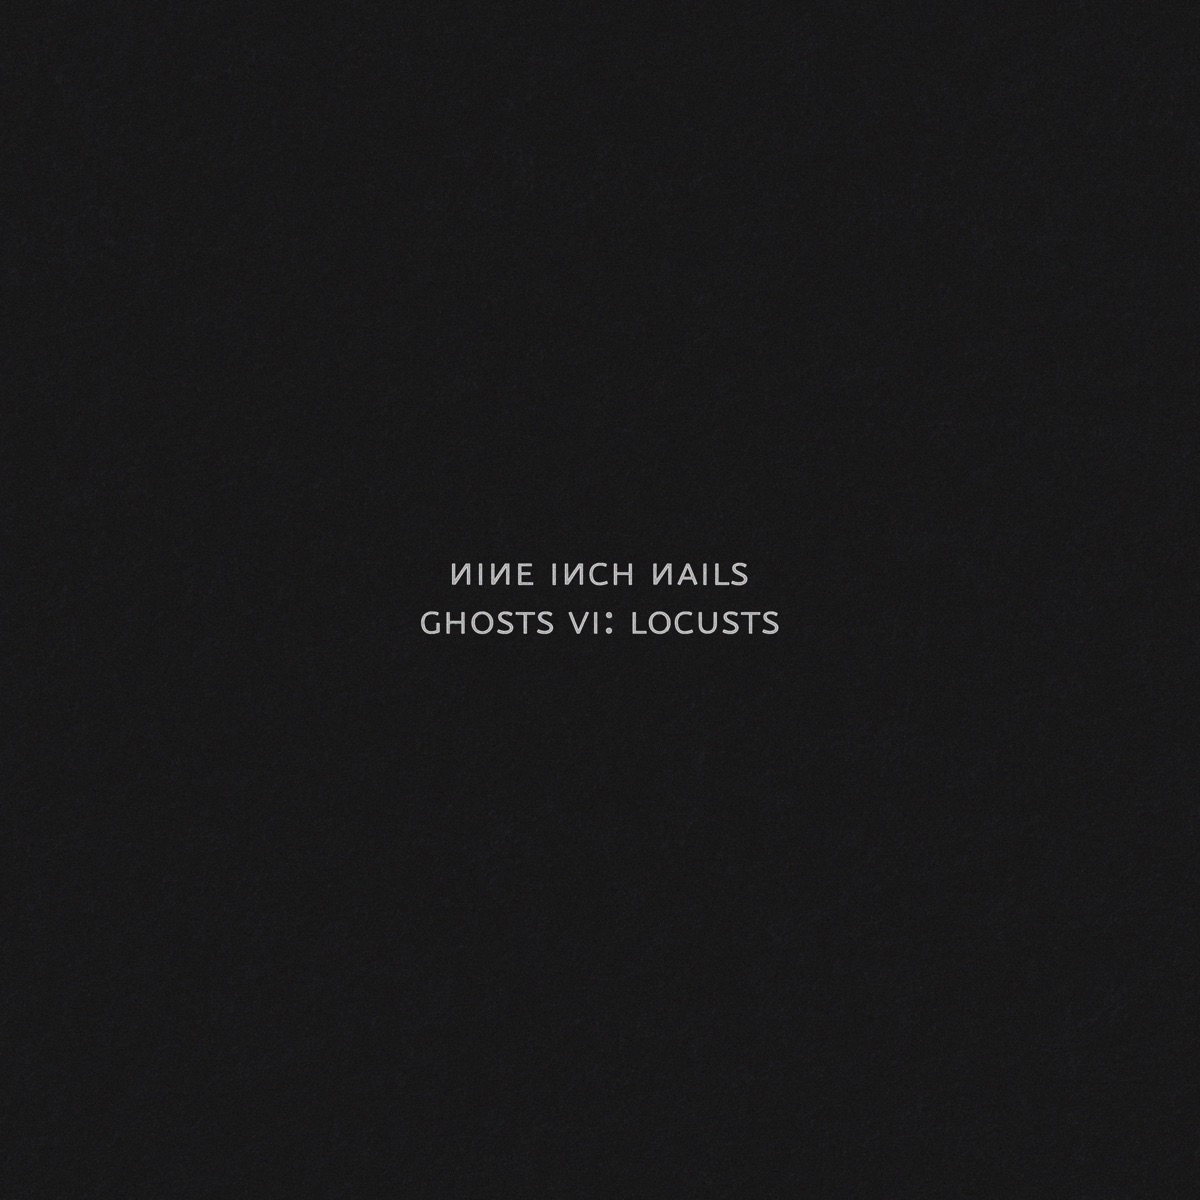 Not The Actual Events - Album by Nine Inch Nails - Apple Music